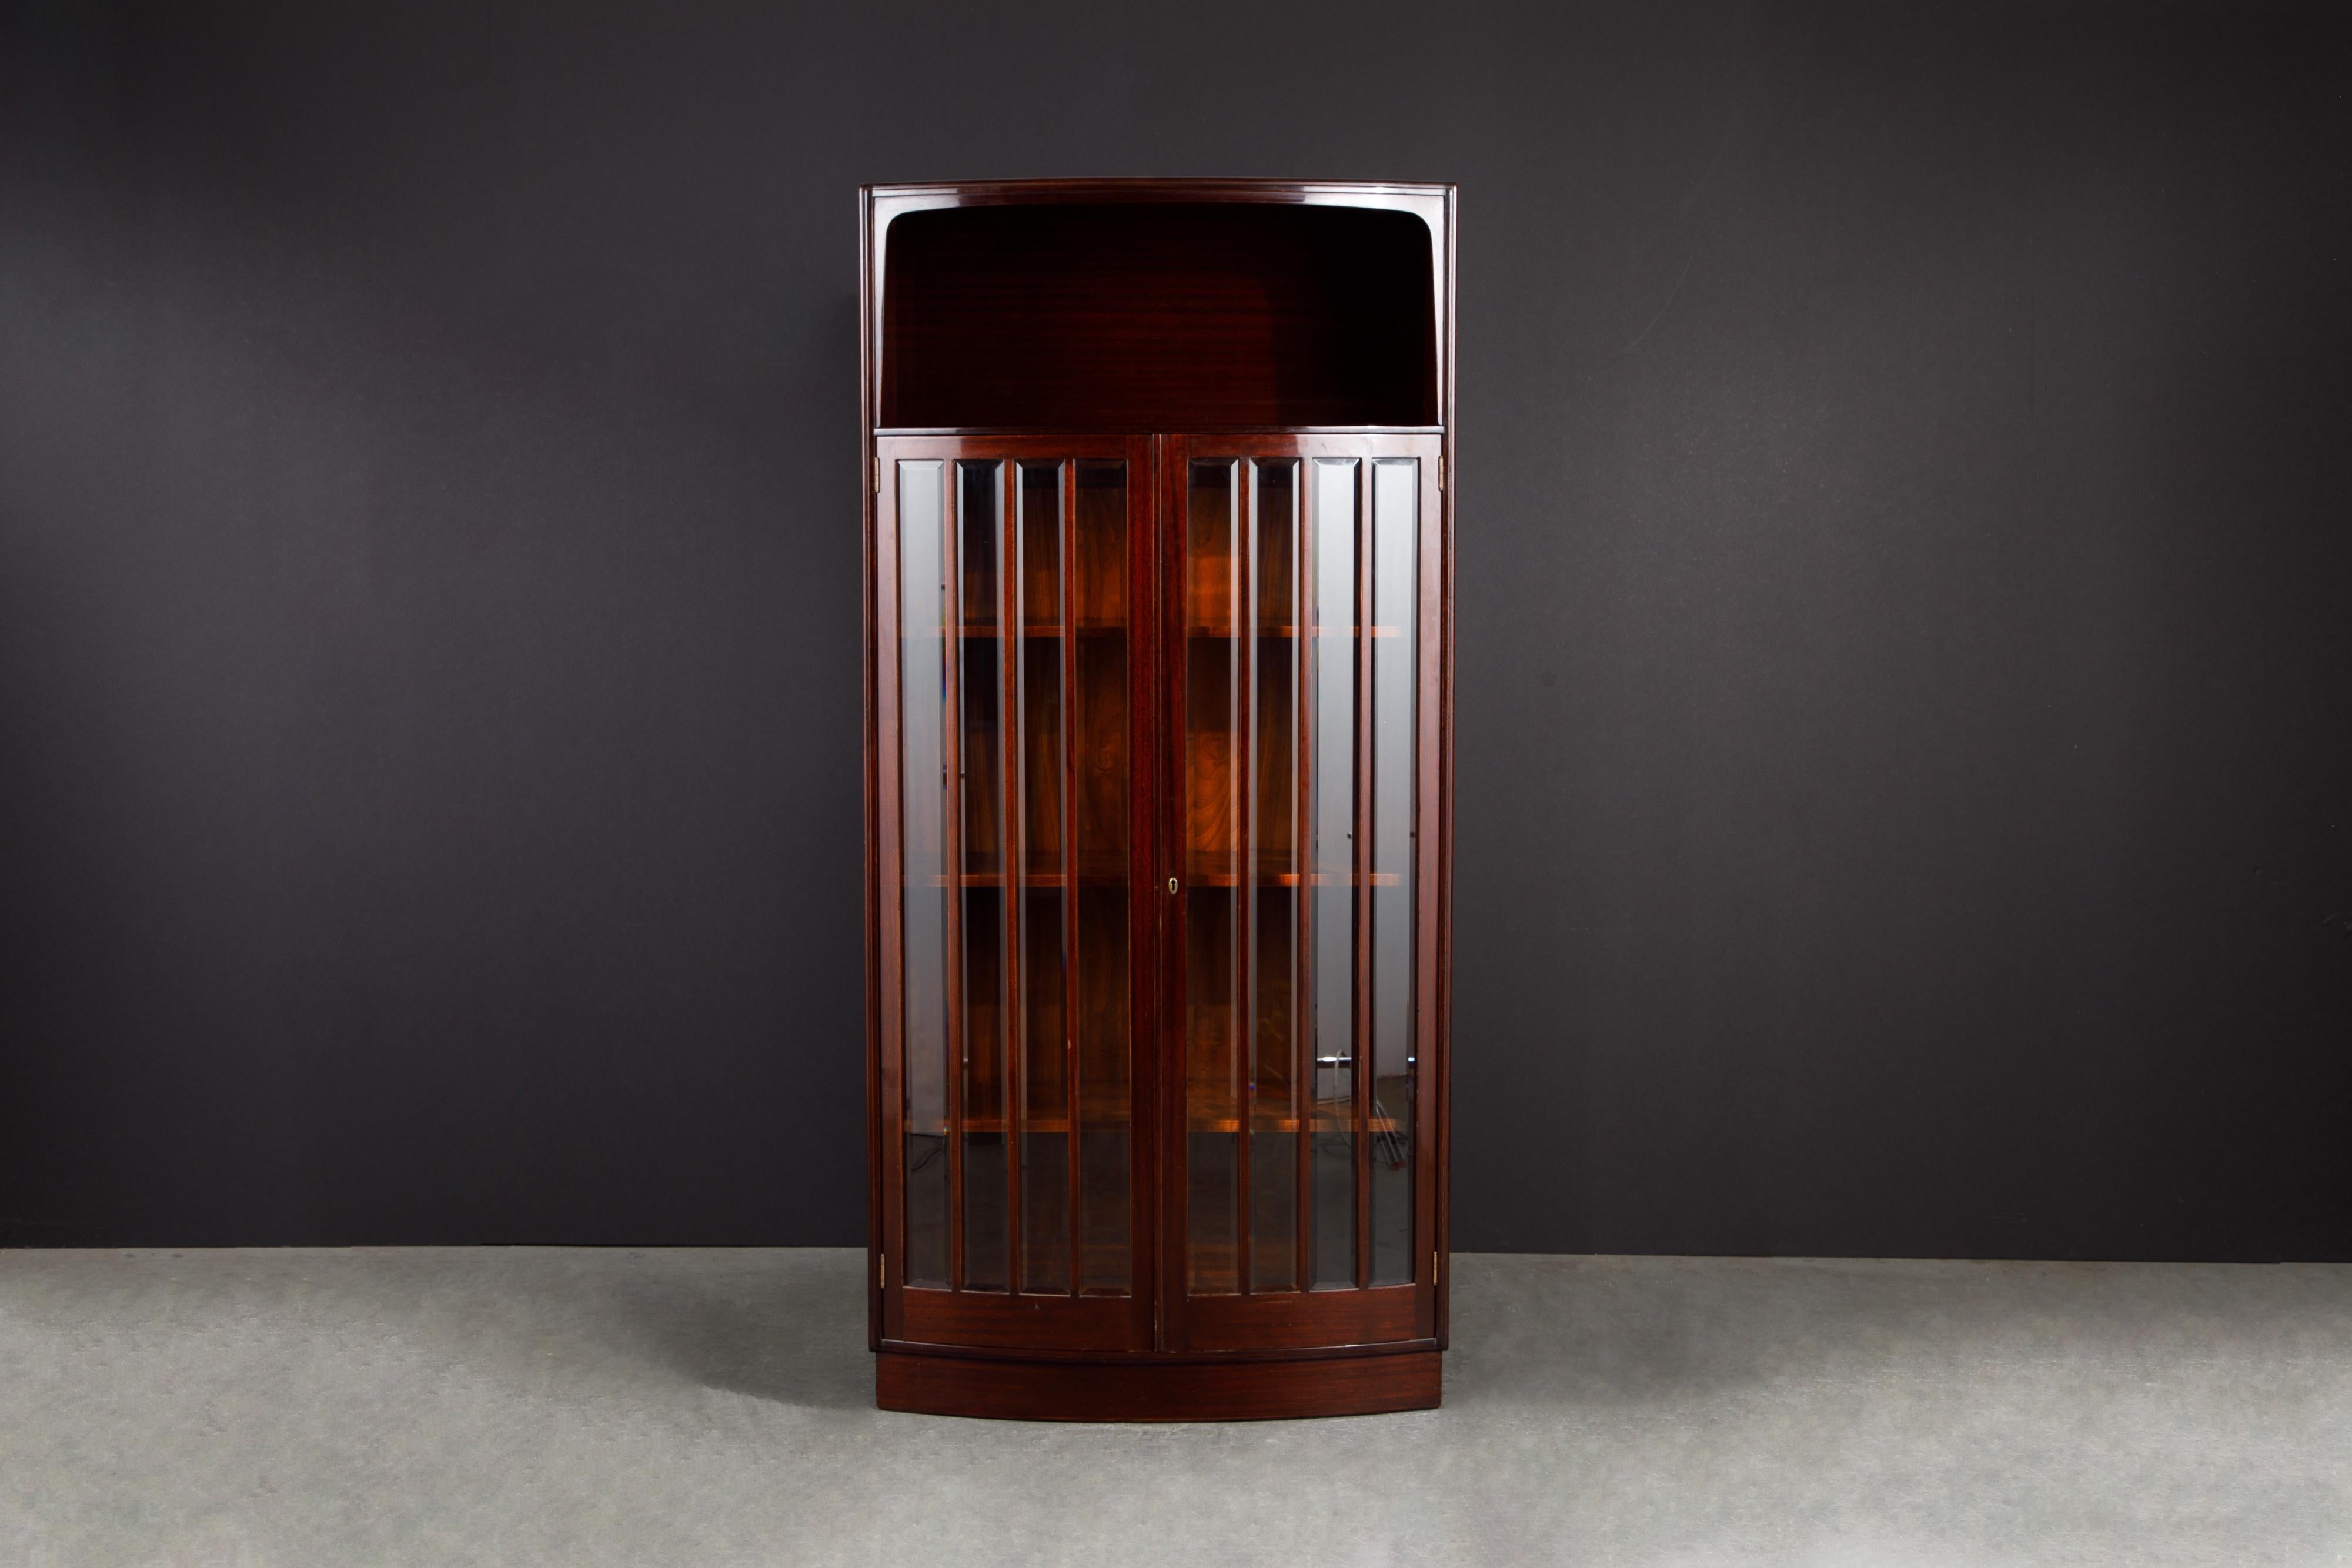 This beautiful circa 1930 art deco vitrine cabinet was constructed in gorgeous deep brown Mahogany, featuring a bowfront design with beveled glass for door panes and adjustable / removable wood shelves. Quality shelf brackets on the interior help to